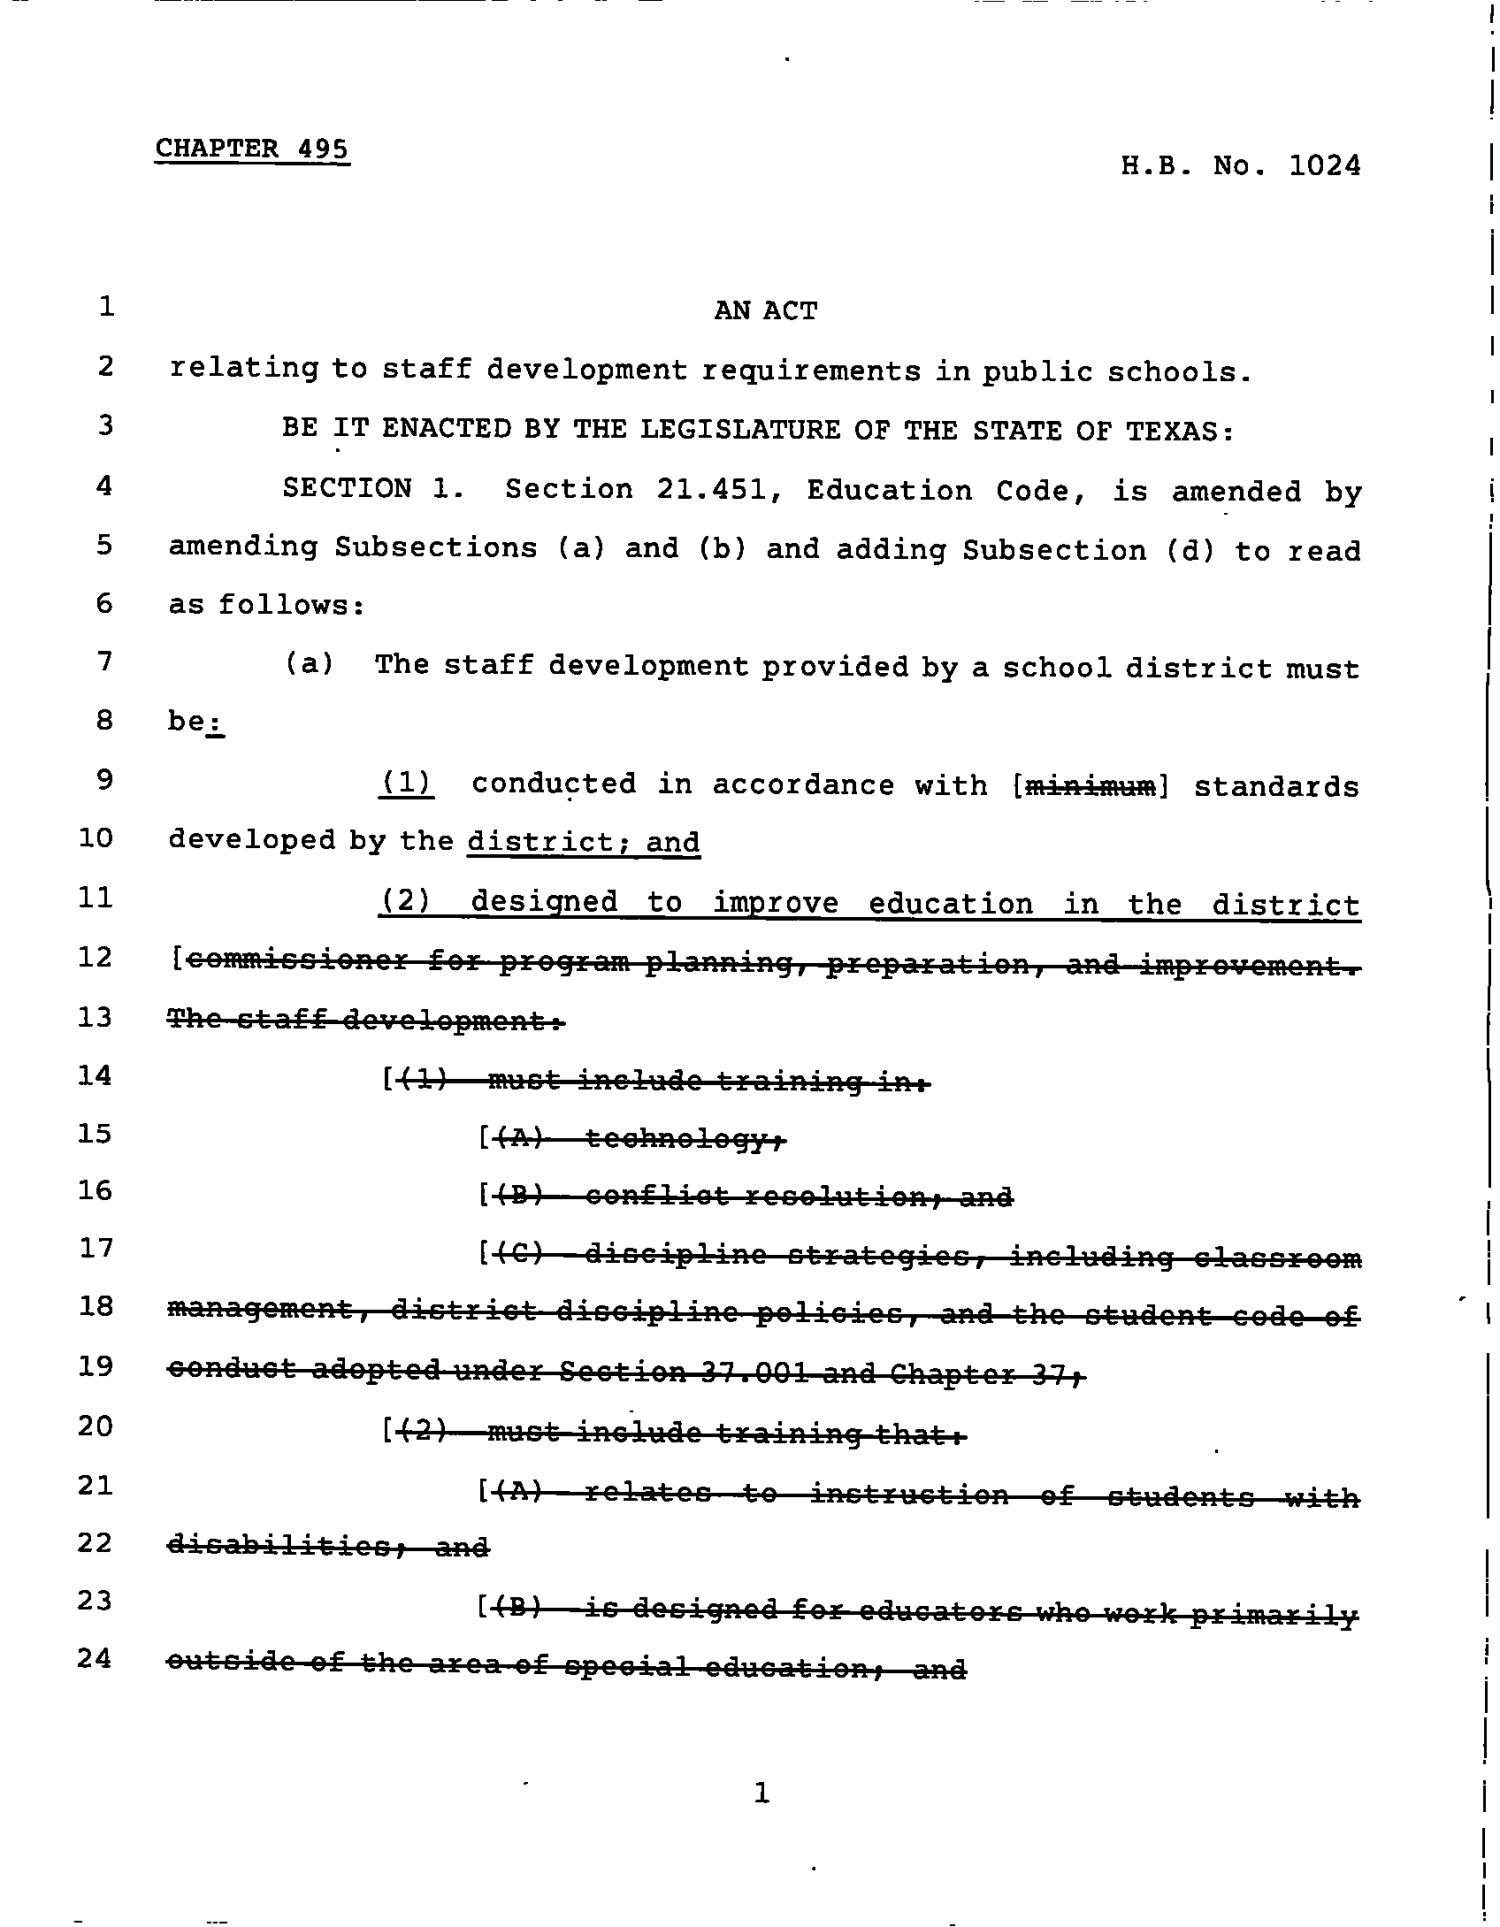 78th Texas Legislature, Regular Session, House Bill 1024, Chapter 495
                                                
                                                    [Sequence #]: 1 of 4
                                                